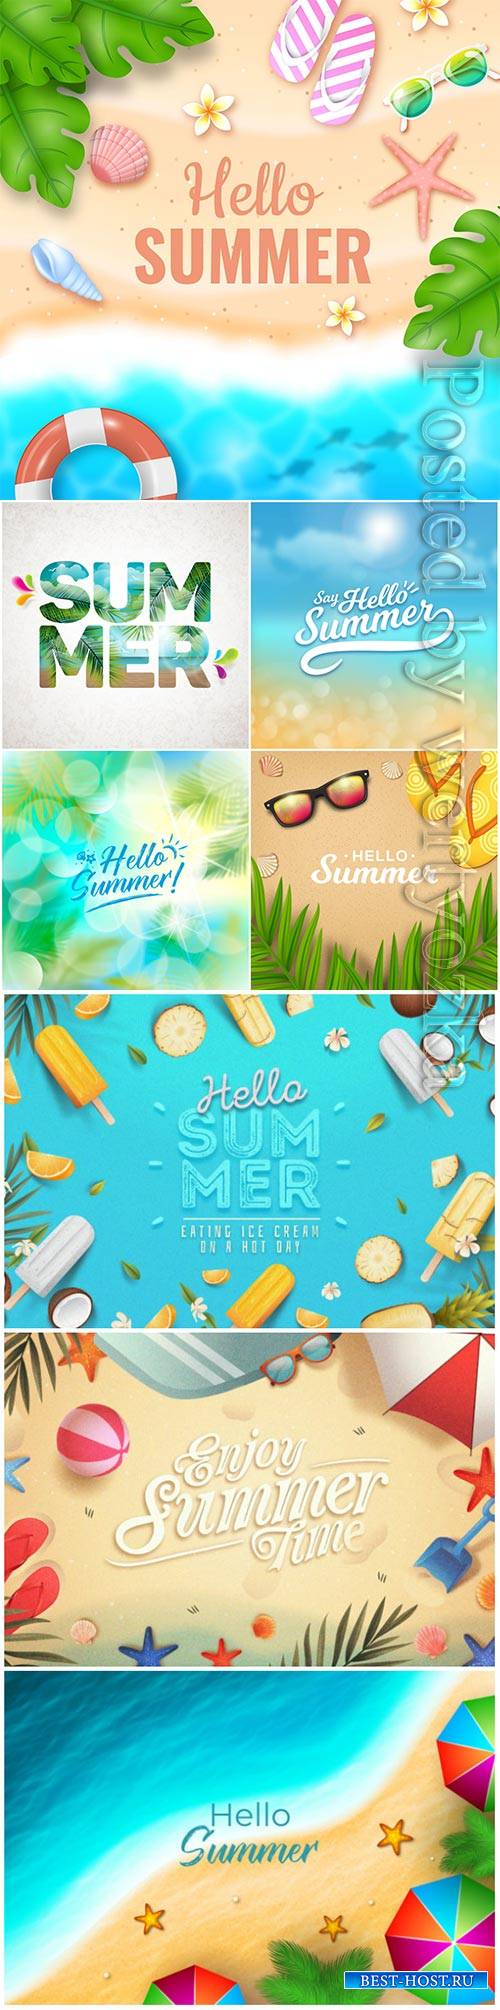 Summer vector collection illustration